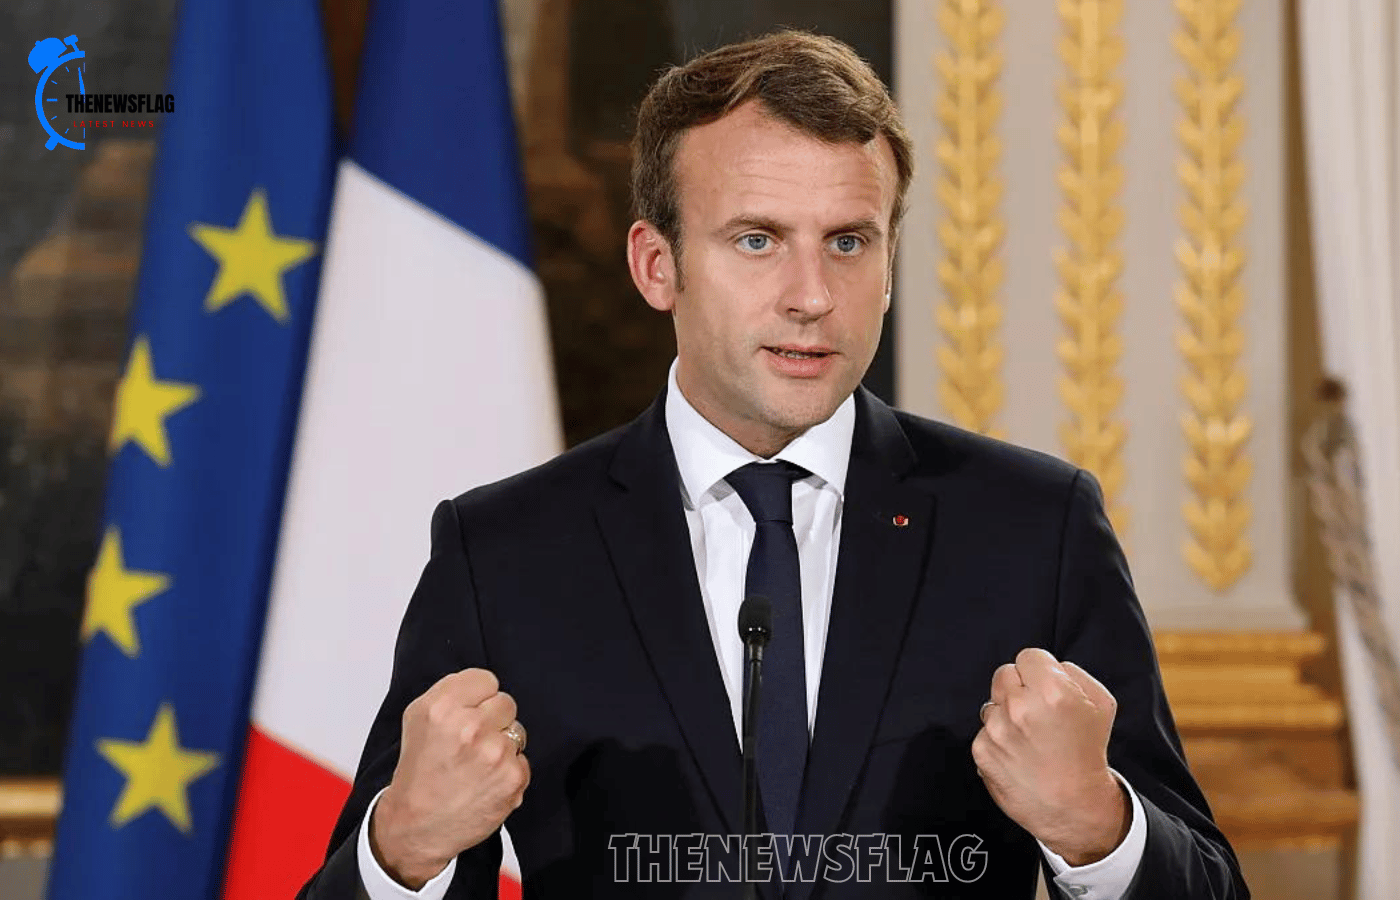 Macron, the president of France, refuses to rule out sending Western troops to Ukraine, saying, "We Must Not Be Weak."